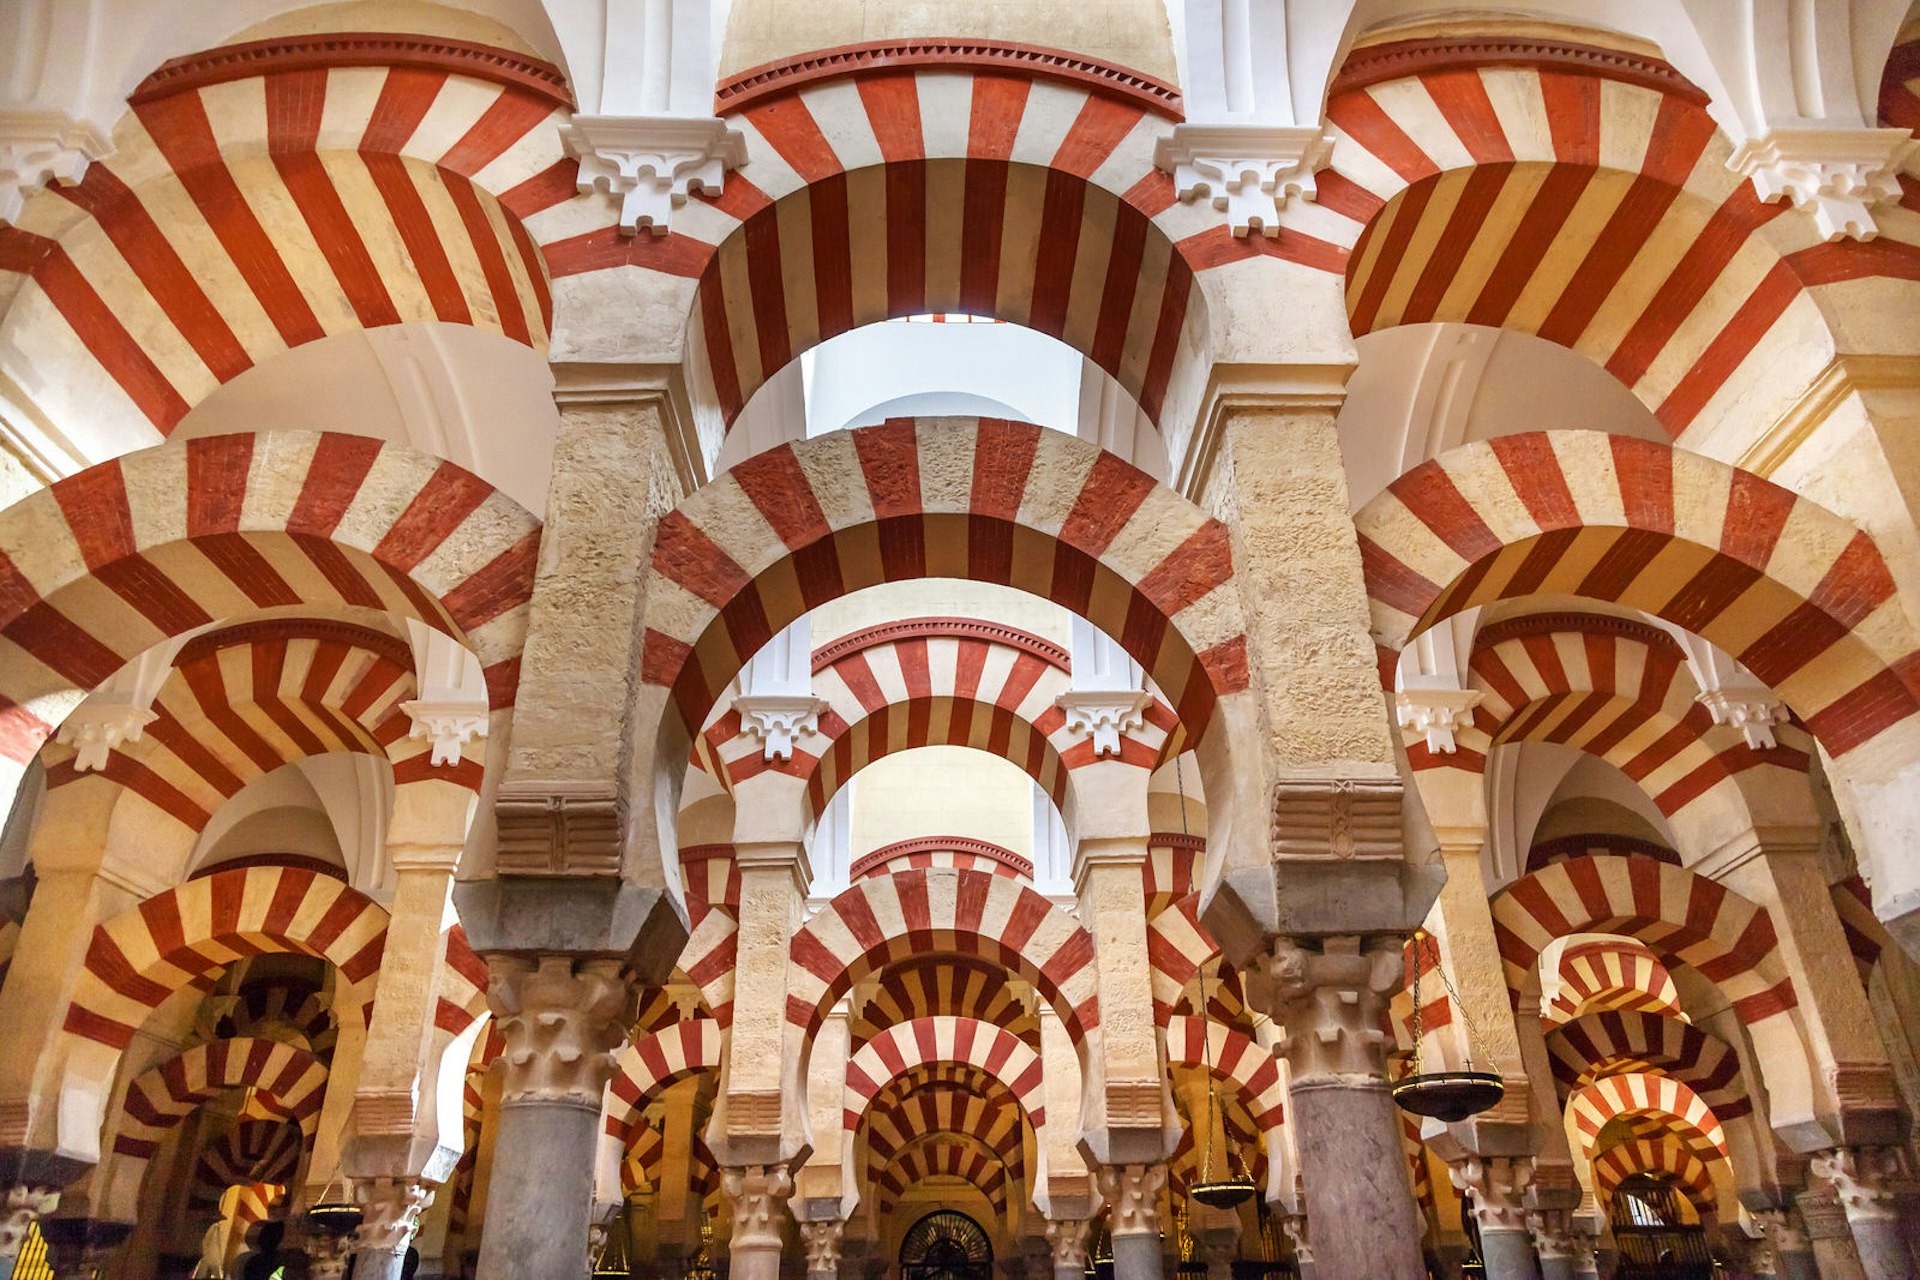 Inside Cordoba's Mezquita; the roof is supported by pillars and lines of arches striped in red brick and white stone. 